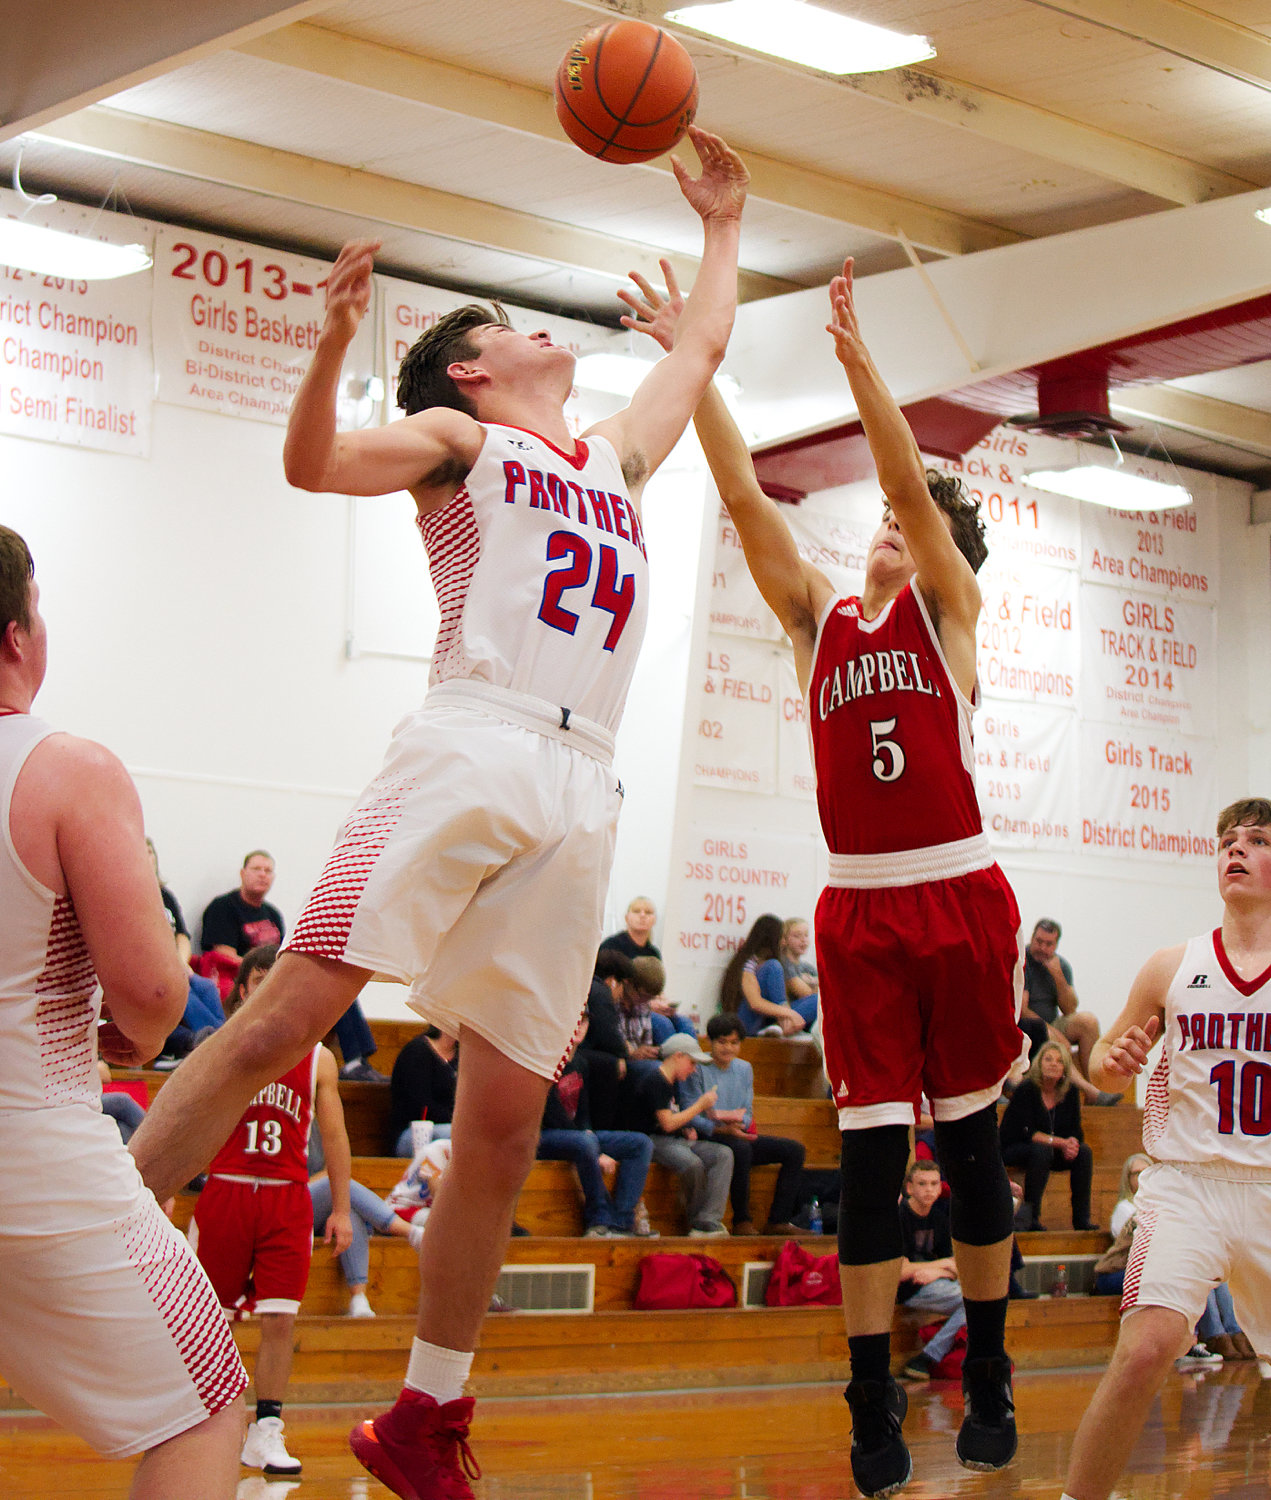 Blane Whatley (24) goes for a rebound.